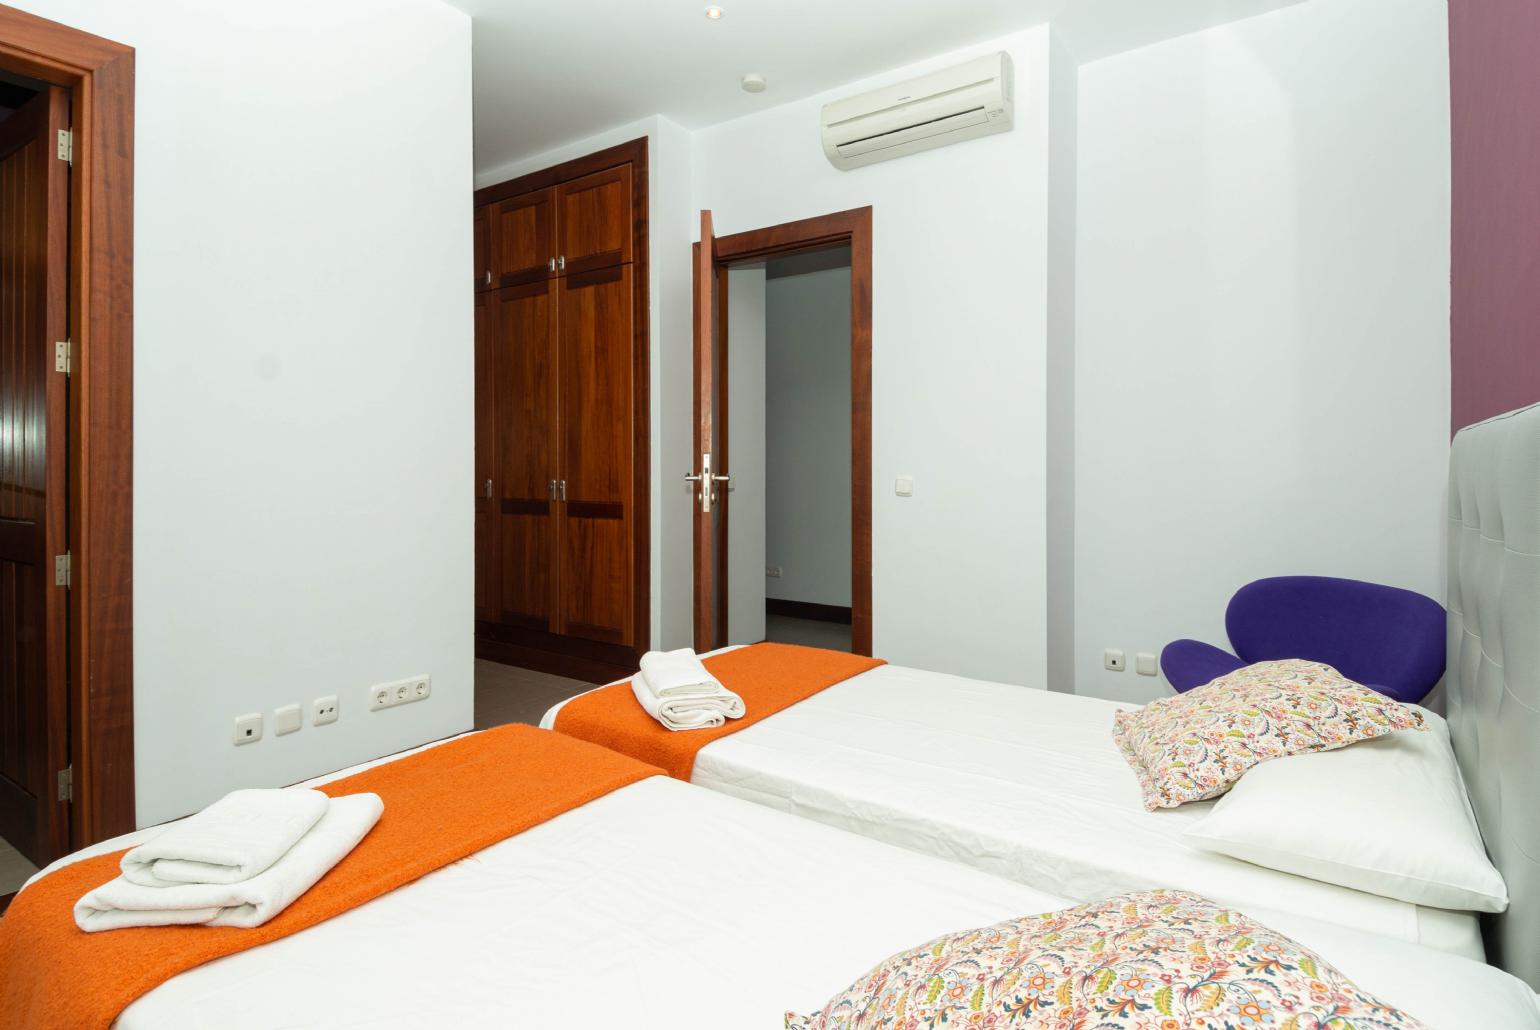 Air-conditioned twin bedroom  with en-suite bathroom and terrace access